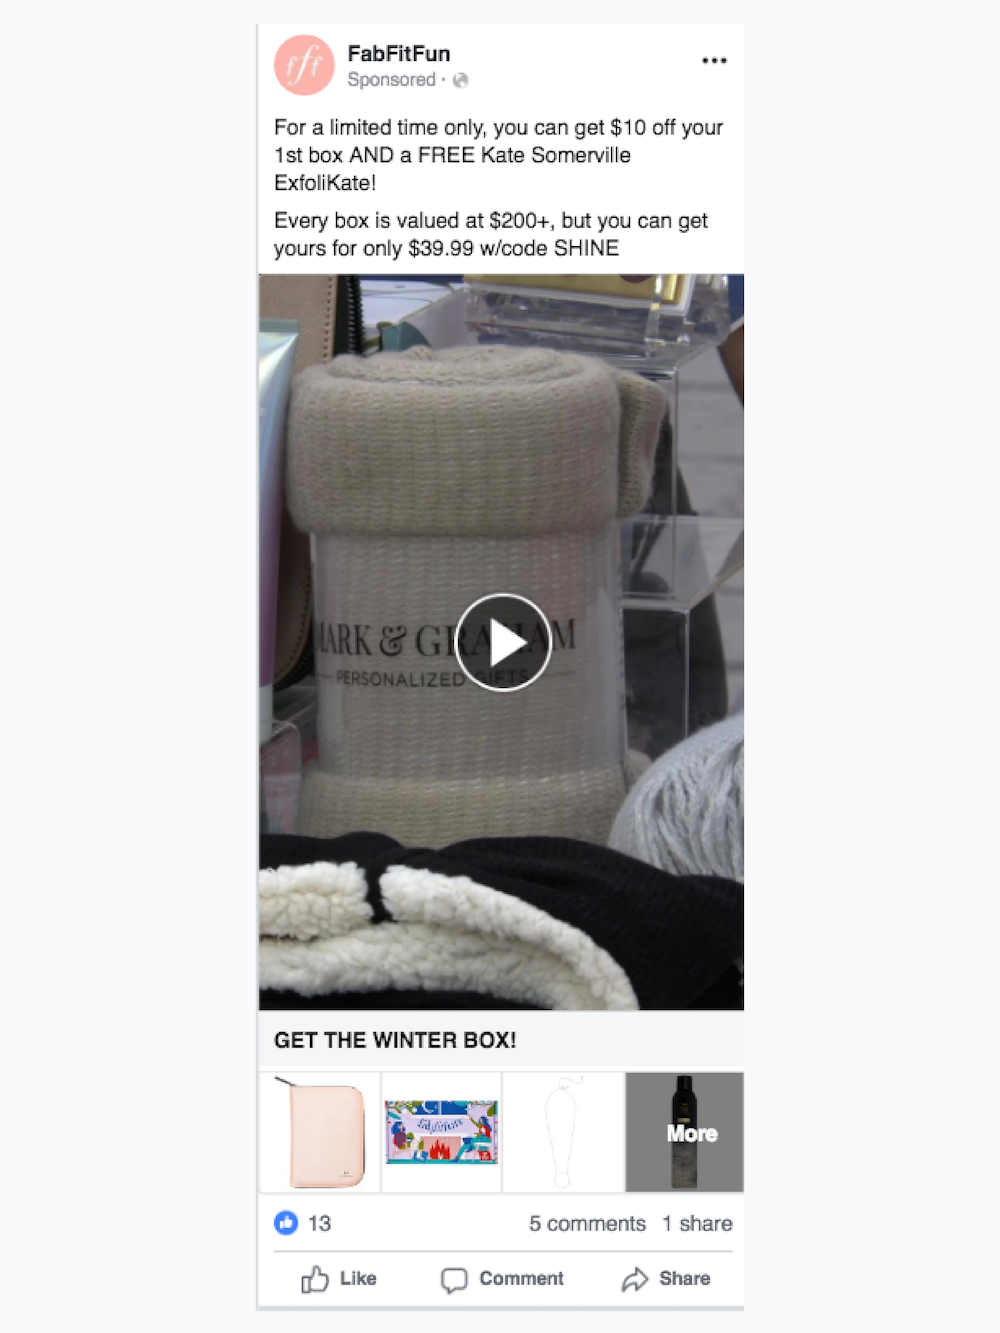 Advertising multiple products on Facebook.